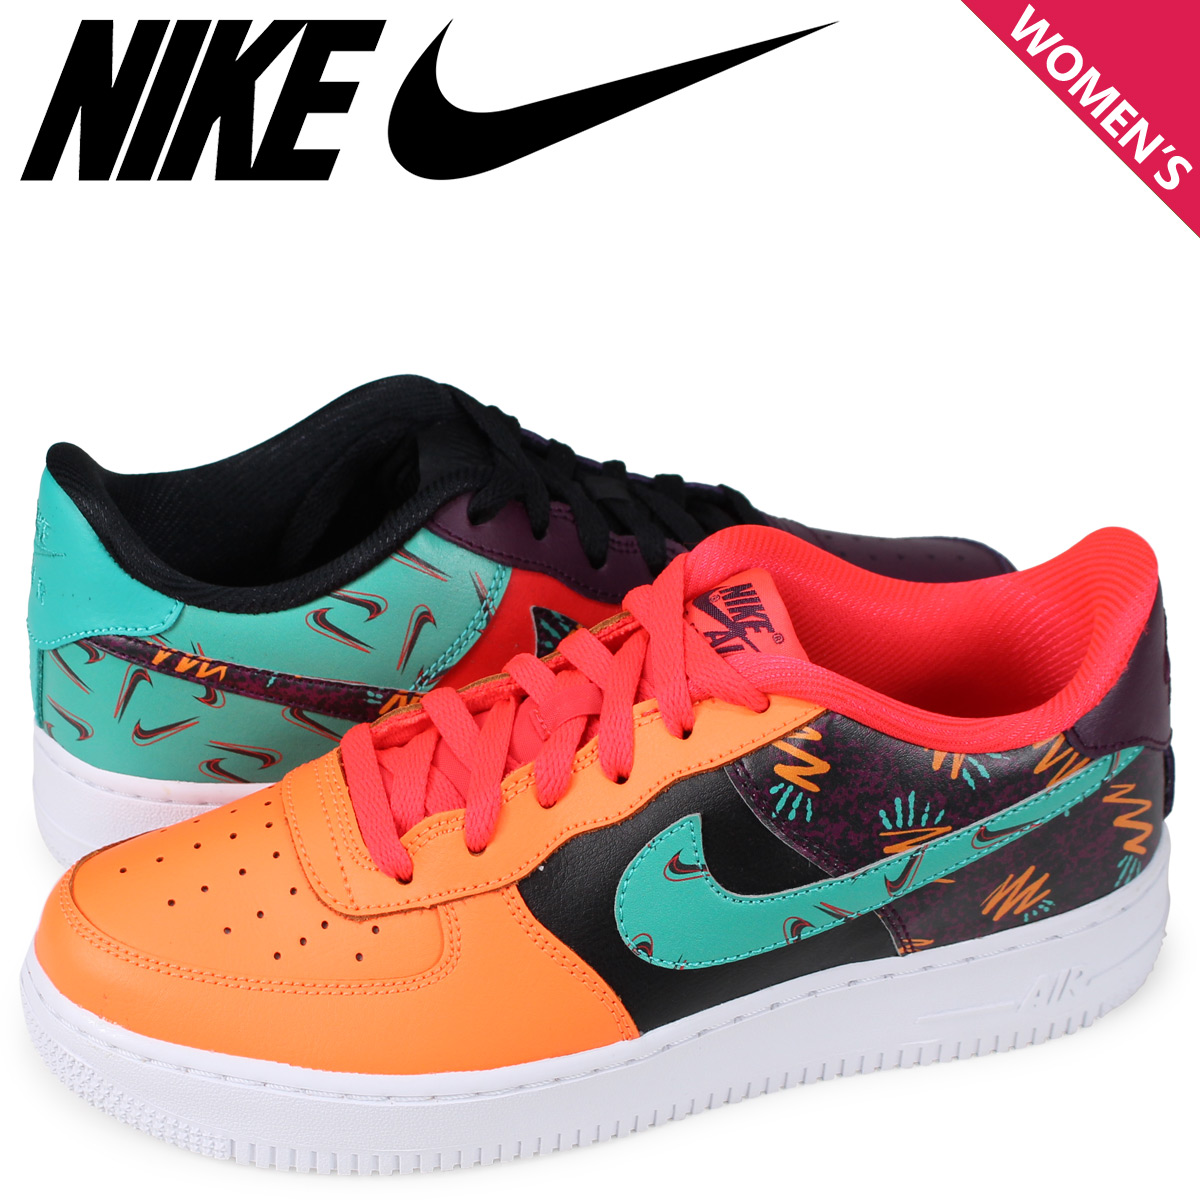 NIKE AIR FORCE 1 BG LOW WHAT THE 90s 